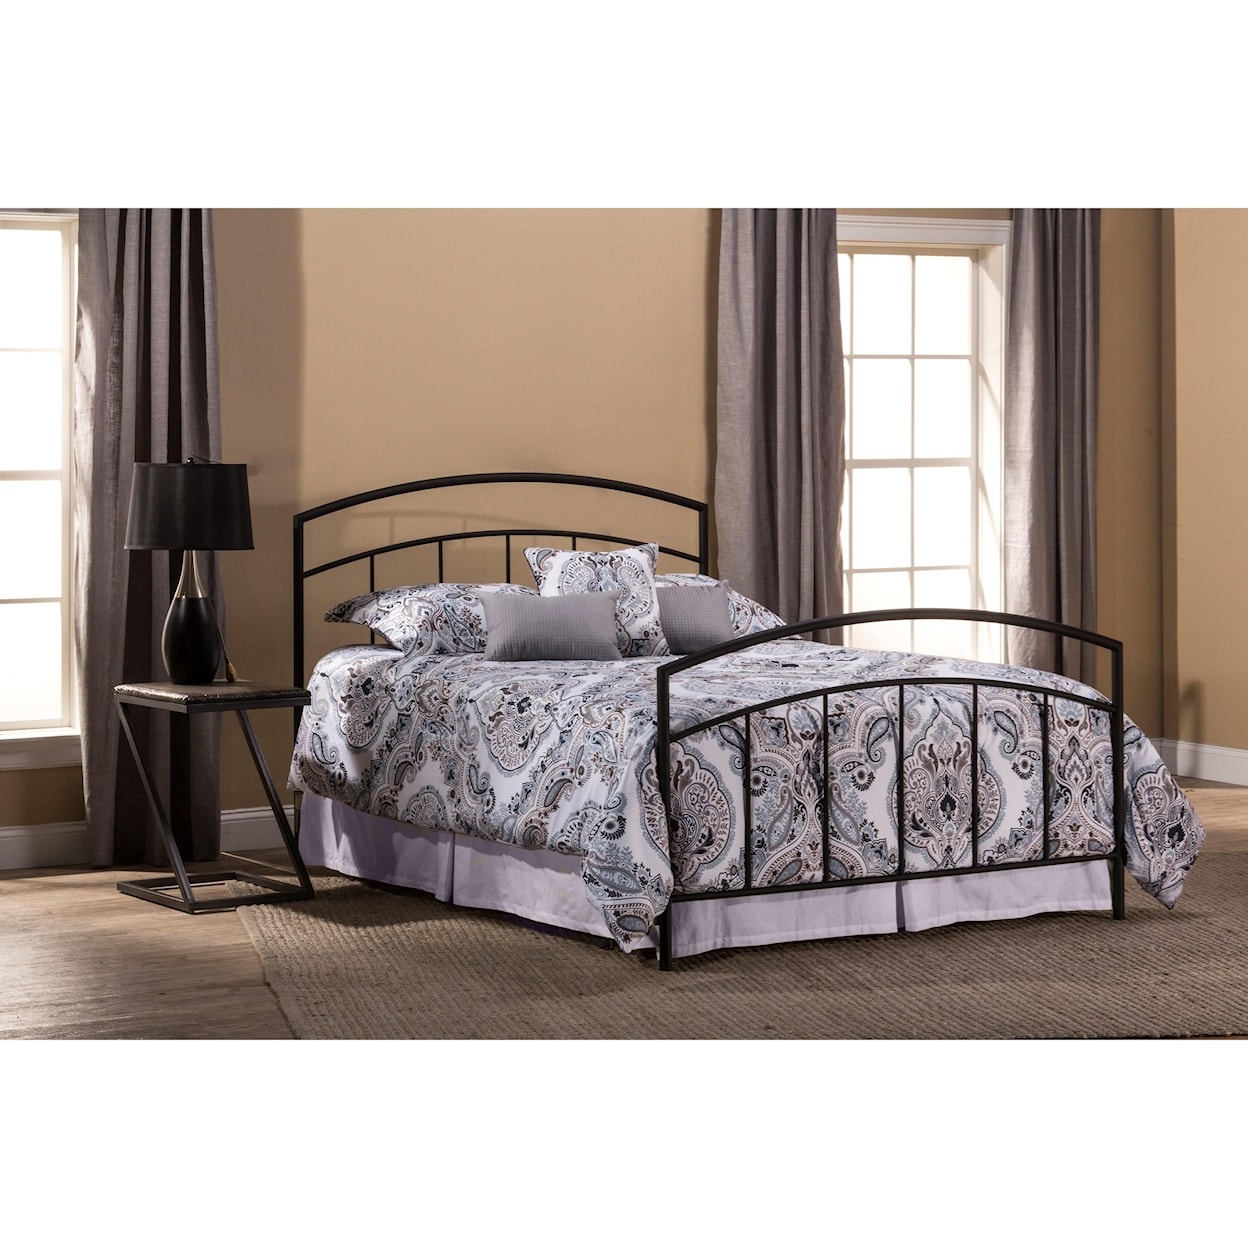 Hillsdale Metal Beds Queen Bed Set with Rails